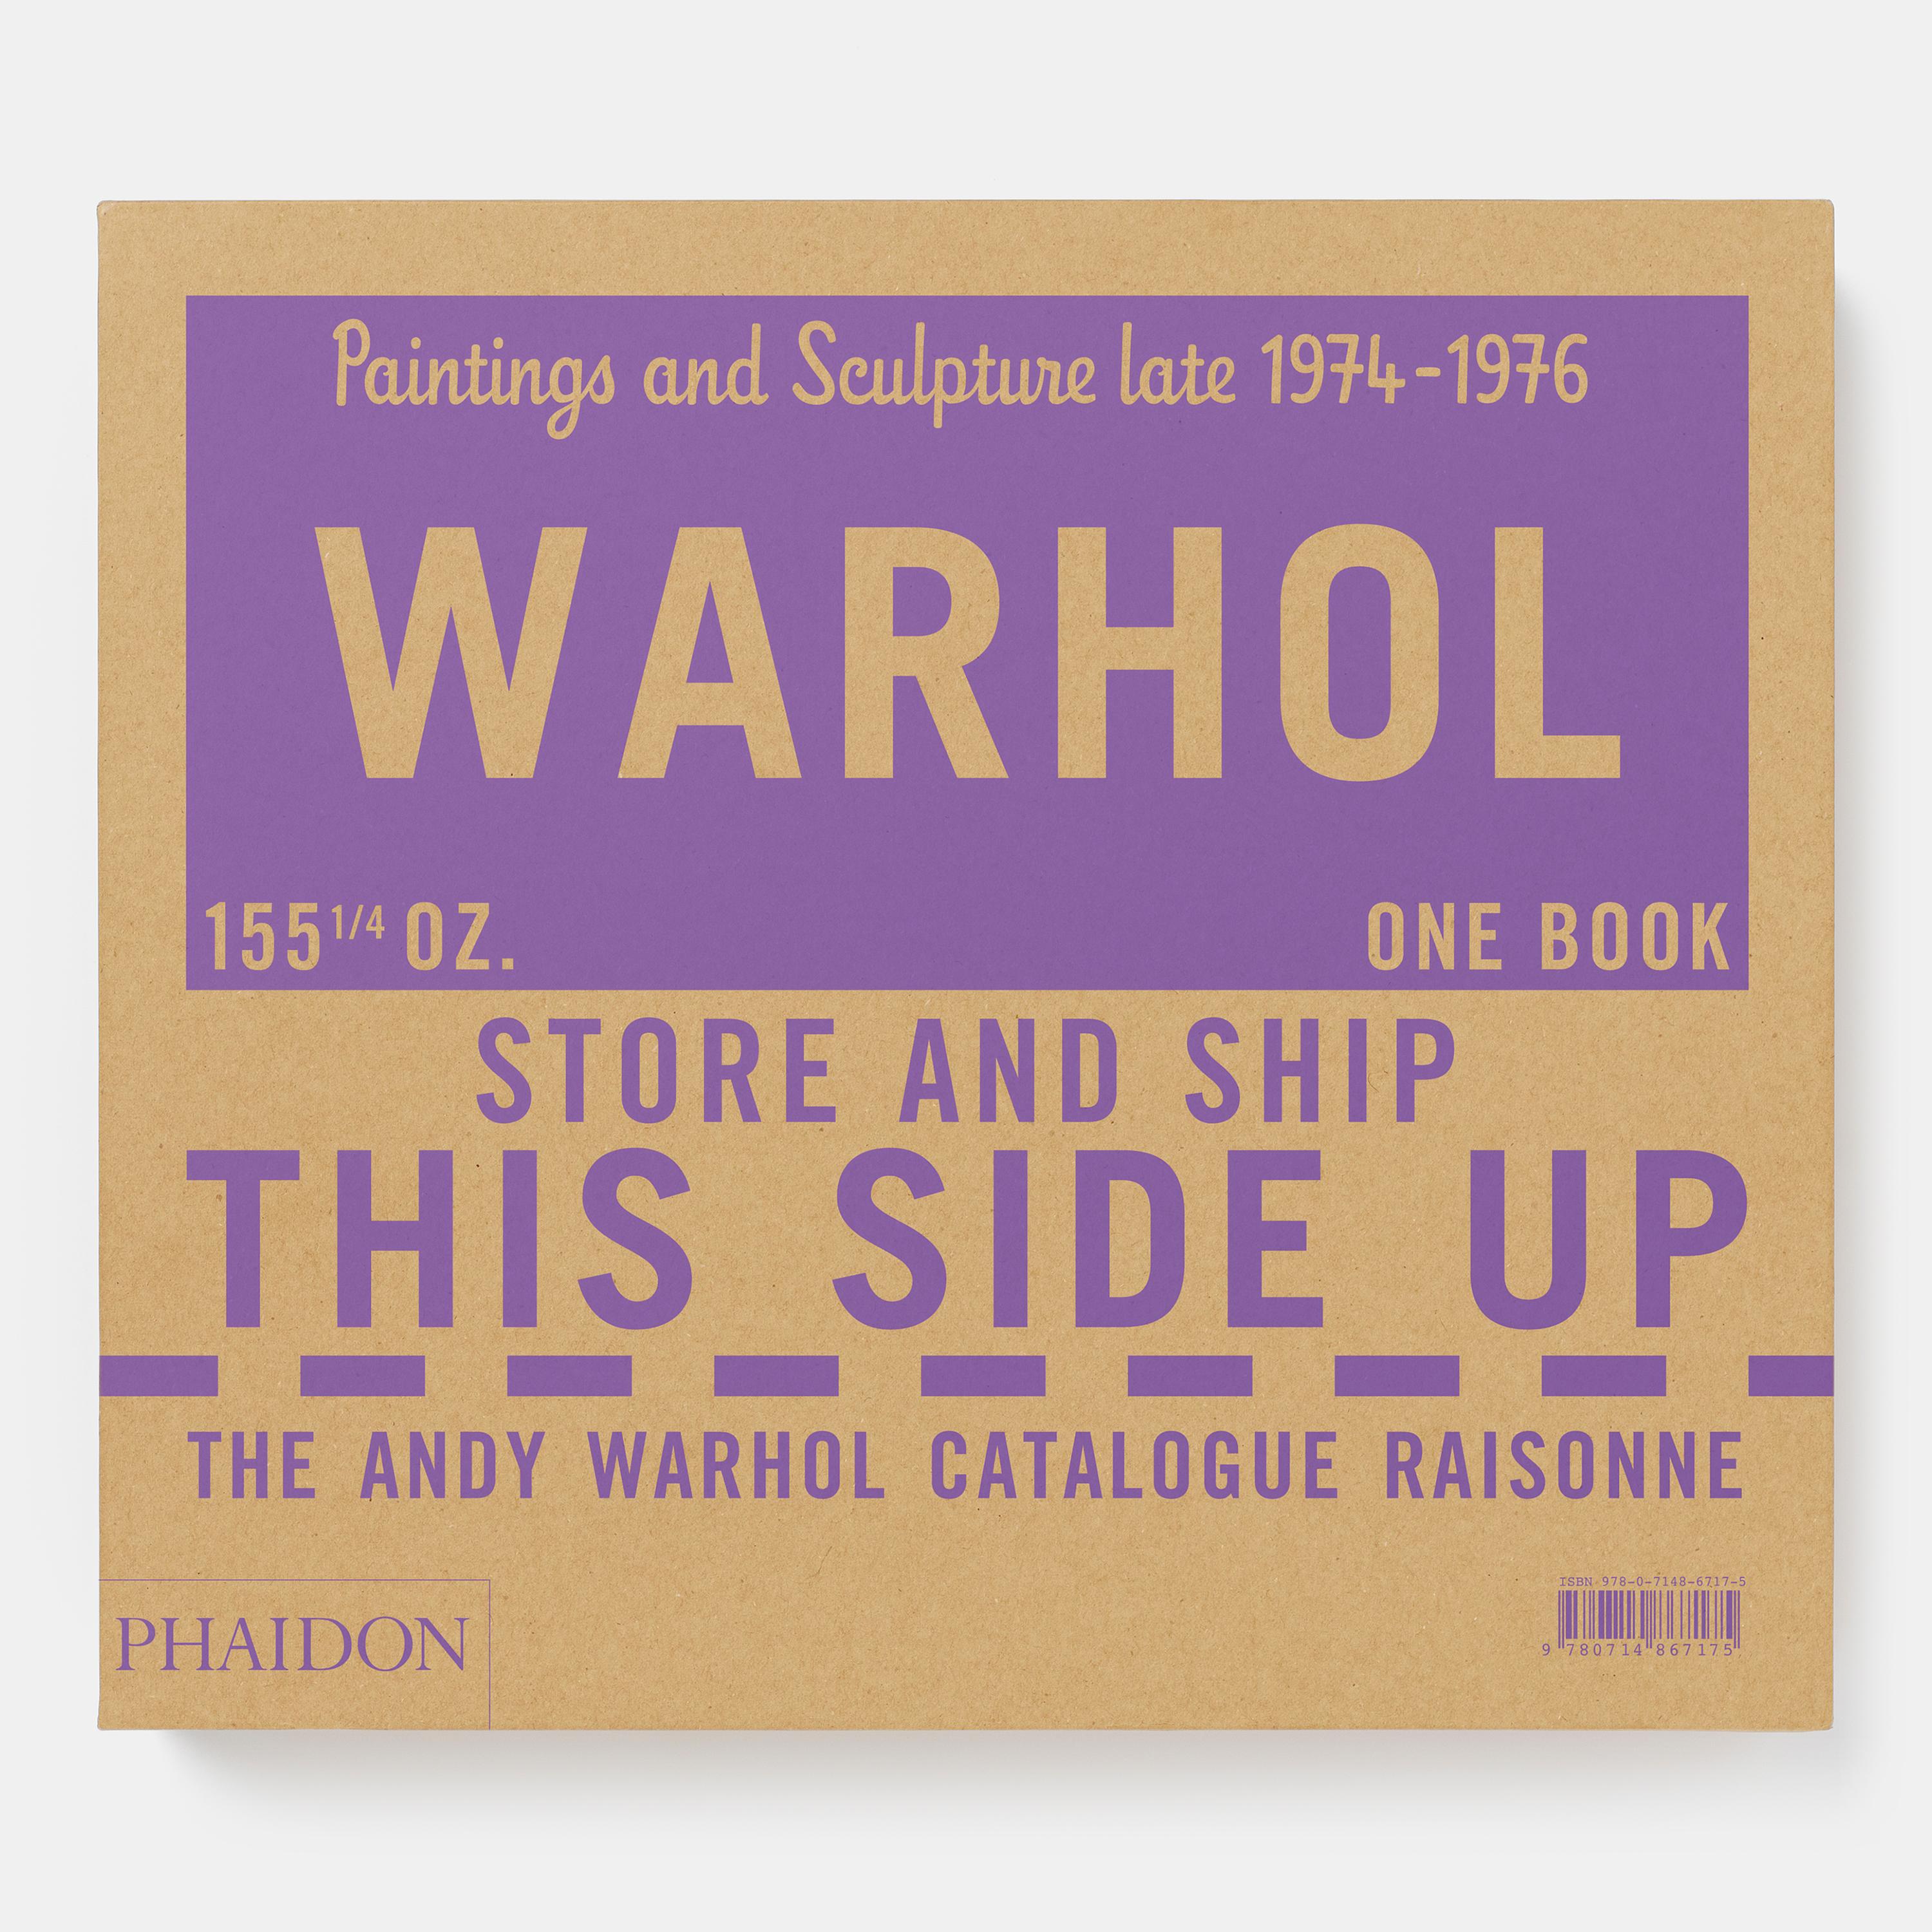 The 607 paintings and one sculpture documented in volume 4 of The Andy Warhol Catalogue Raisonné were produced during a period of less than three years, from late 1974 through early 1977. 

In September 1974, Warhol changed studios, moving across